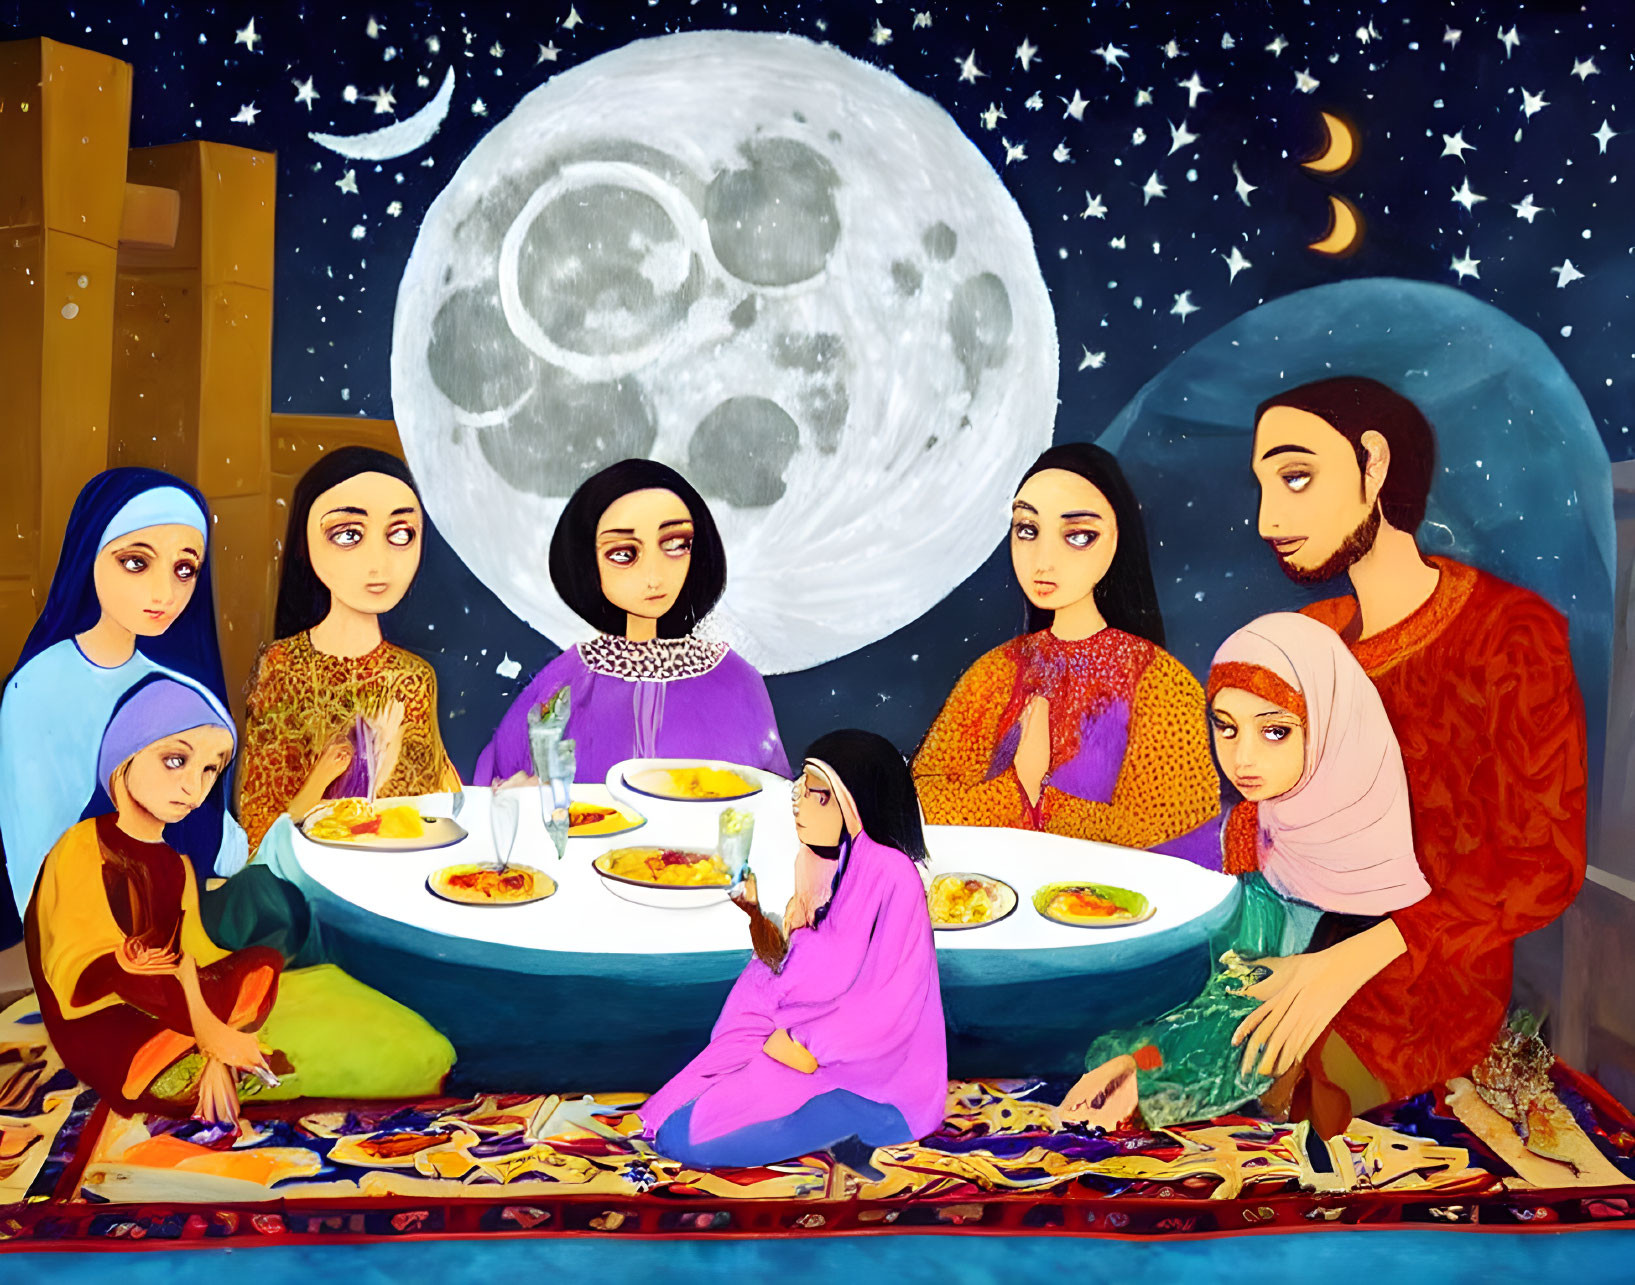 Vibrant illustration of people sharing a meal under a starry sky